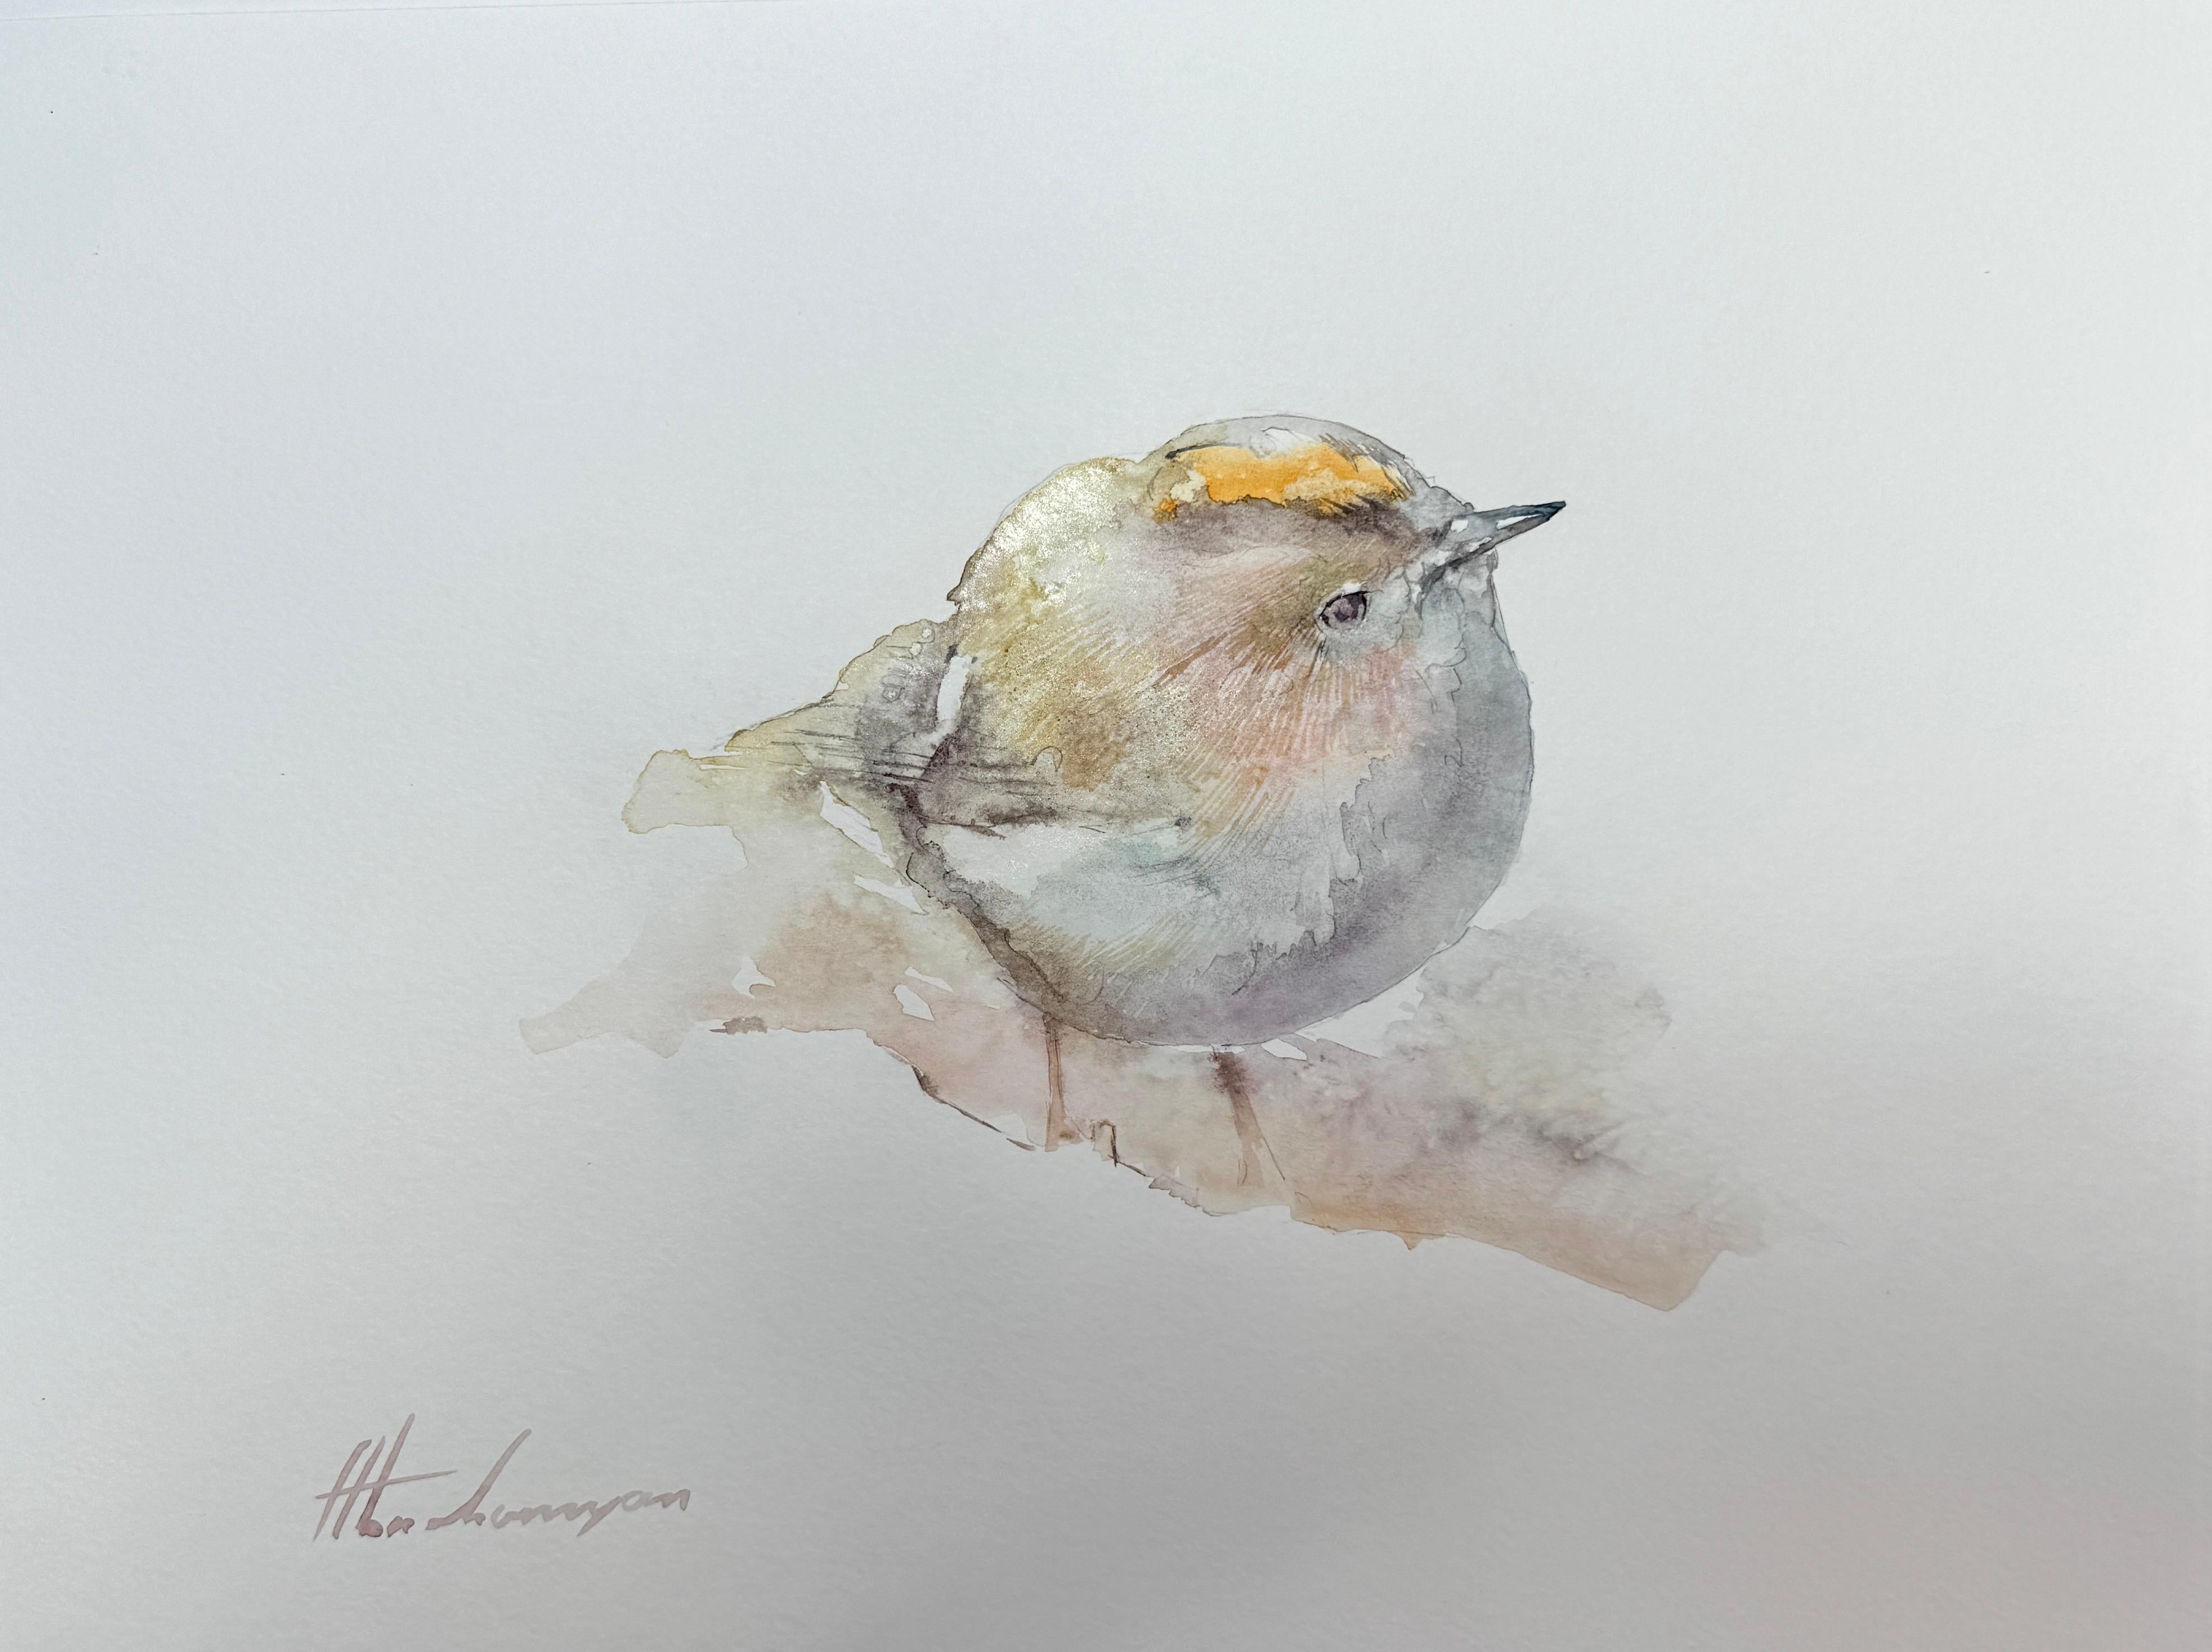 Artyom Abrahamyan Animal Art - Golden Crowned Kinglet, Watercolor on Paper, Handmade Painting, One of a Kind